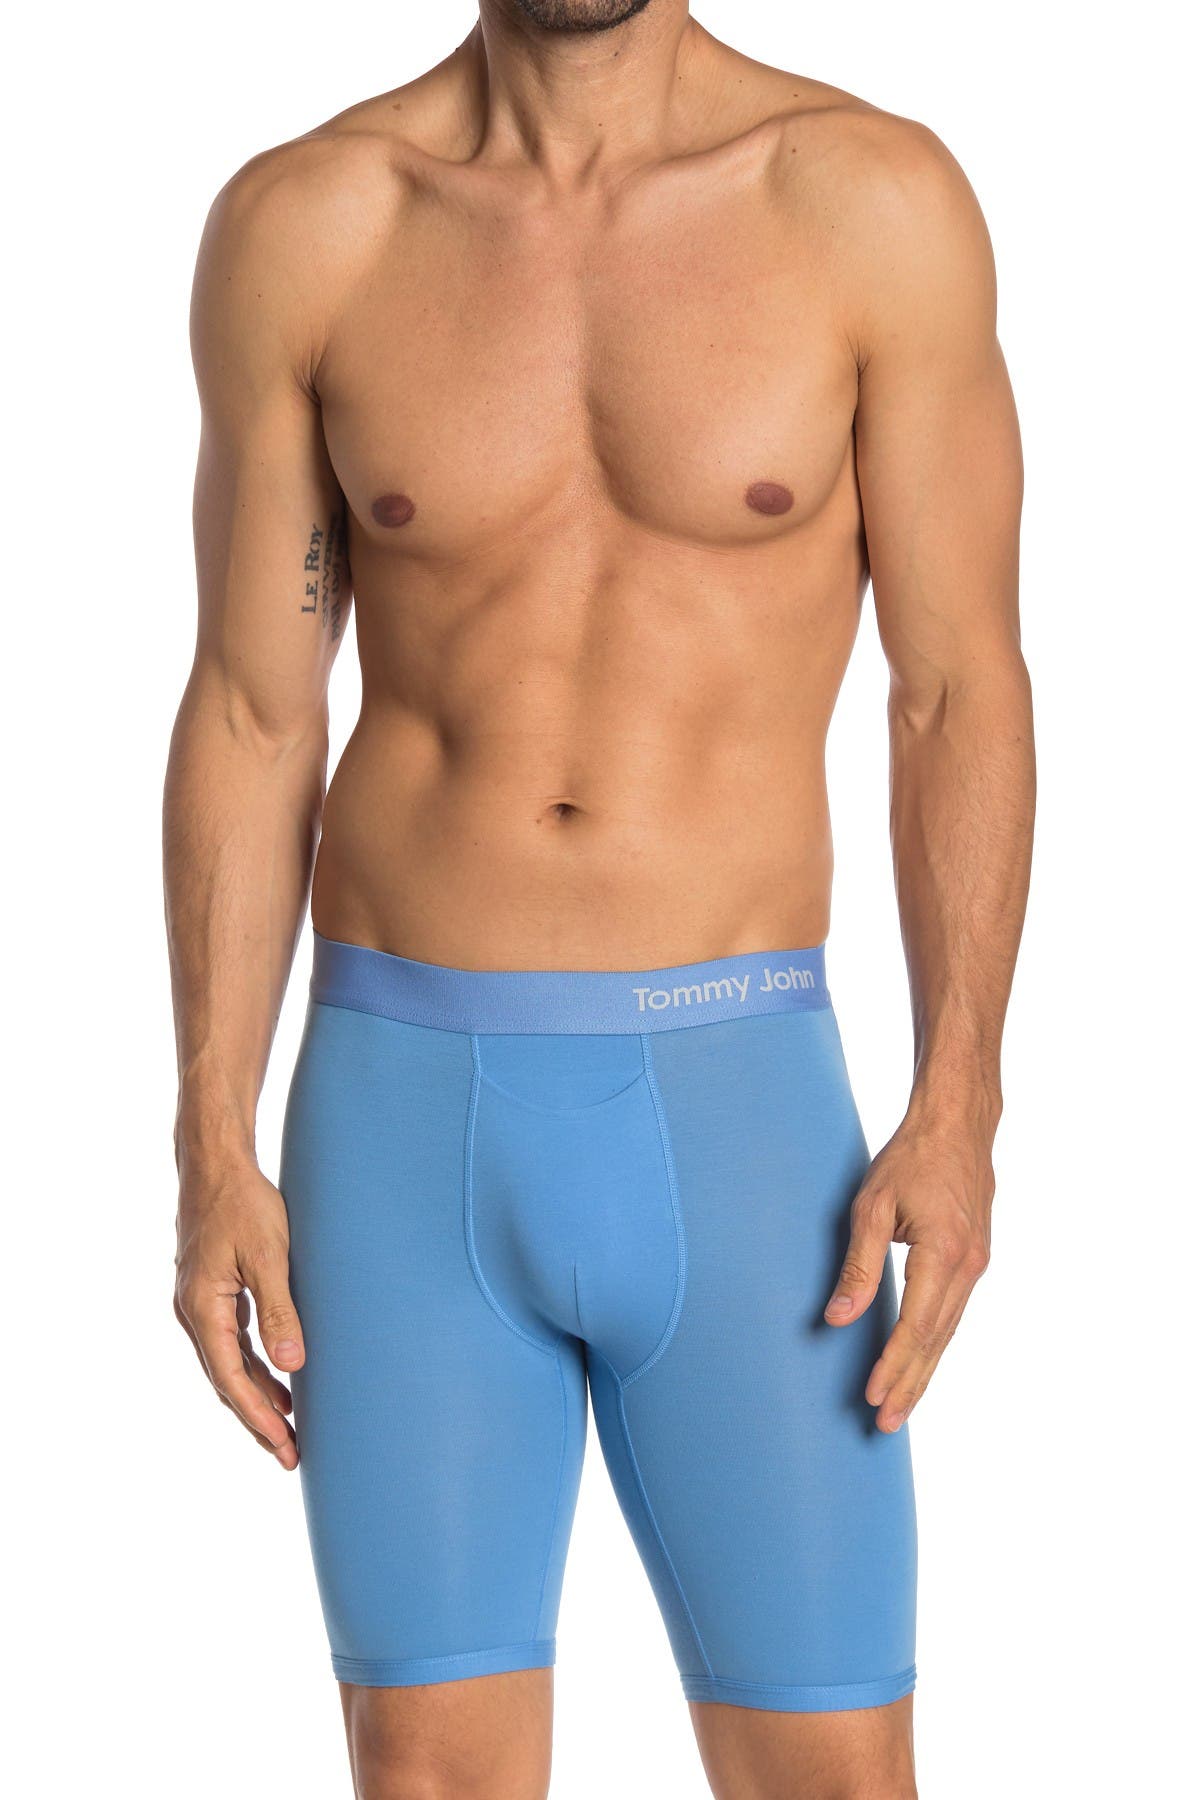 tommy john cool cotton boxer brief